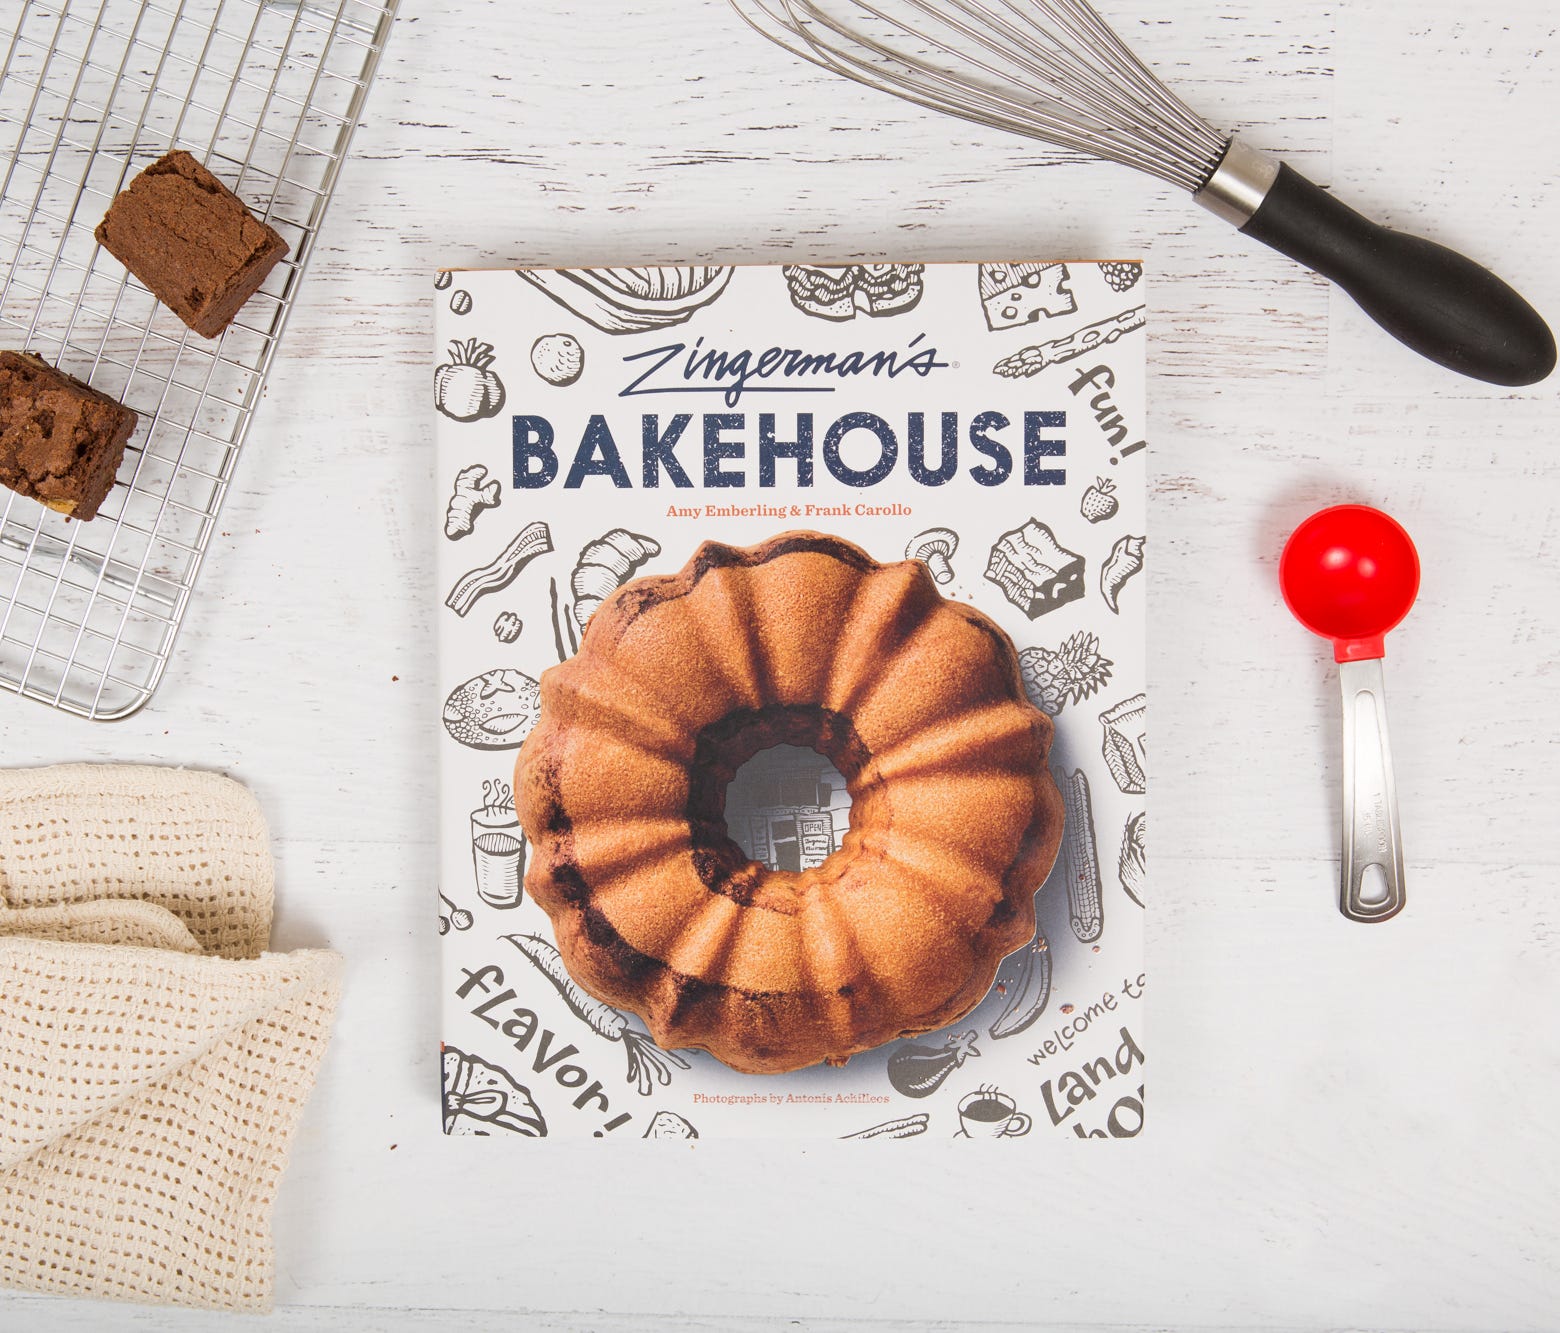 The recently published 'Zingerman's Bakehouse' gives home cooks across the country a chance to create Zingerman's incredible breads, cookies, brownies and pastries.